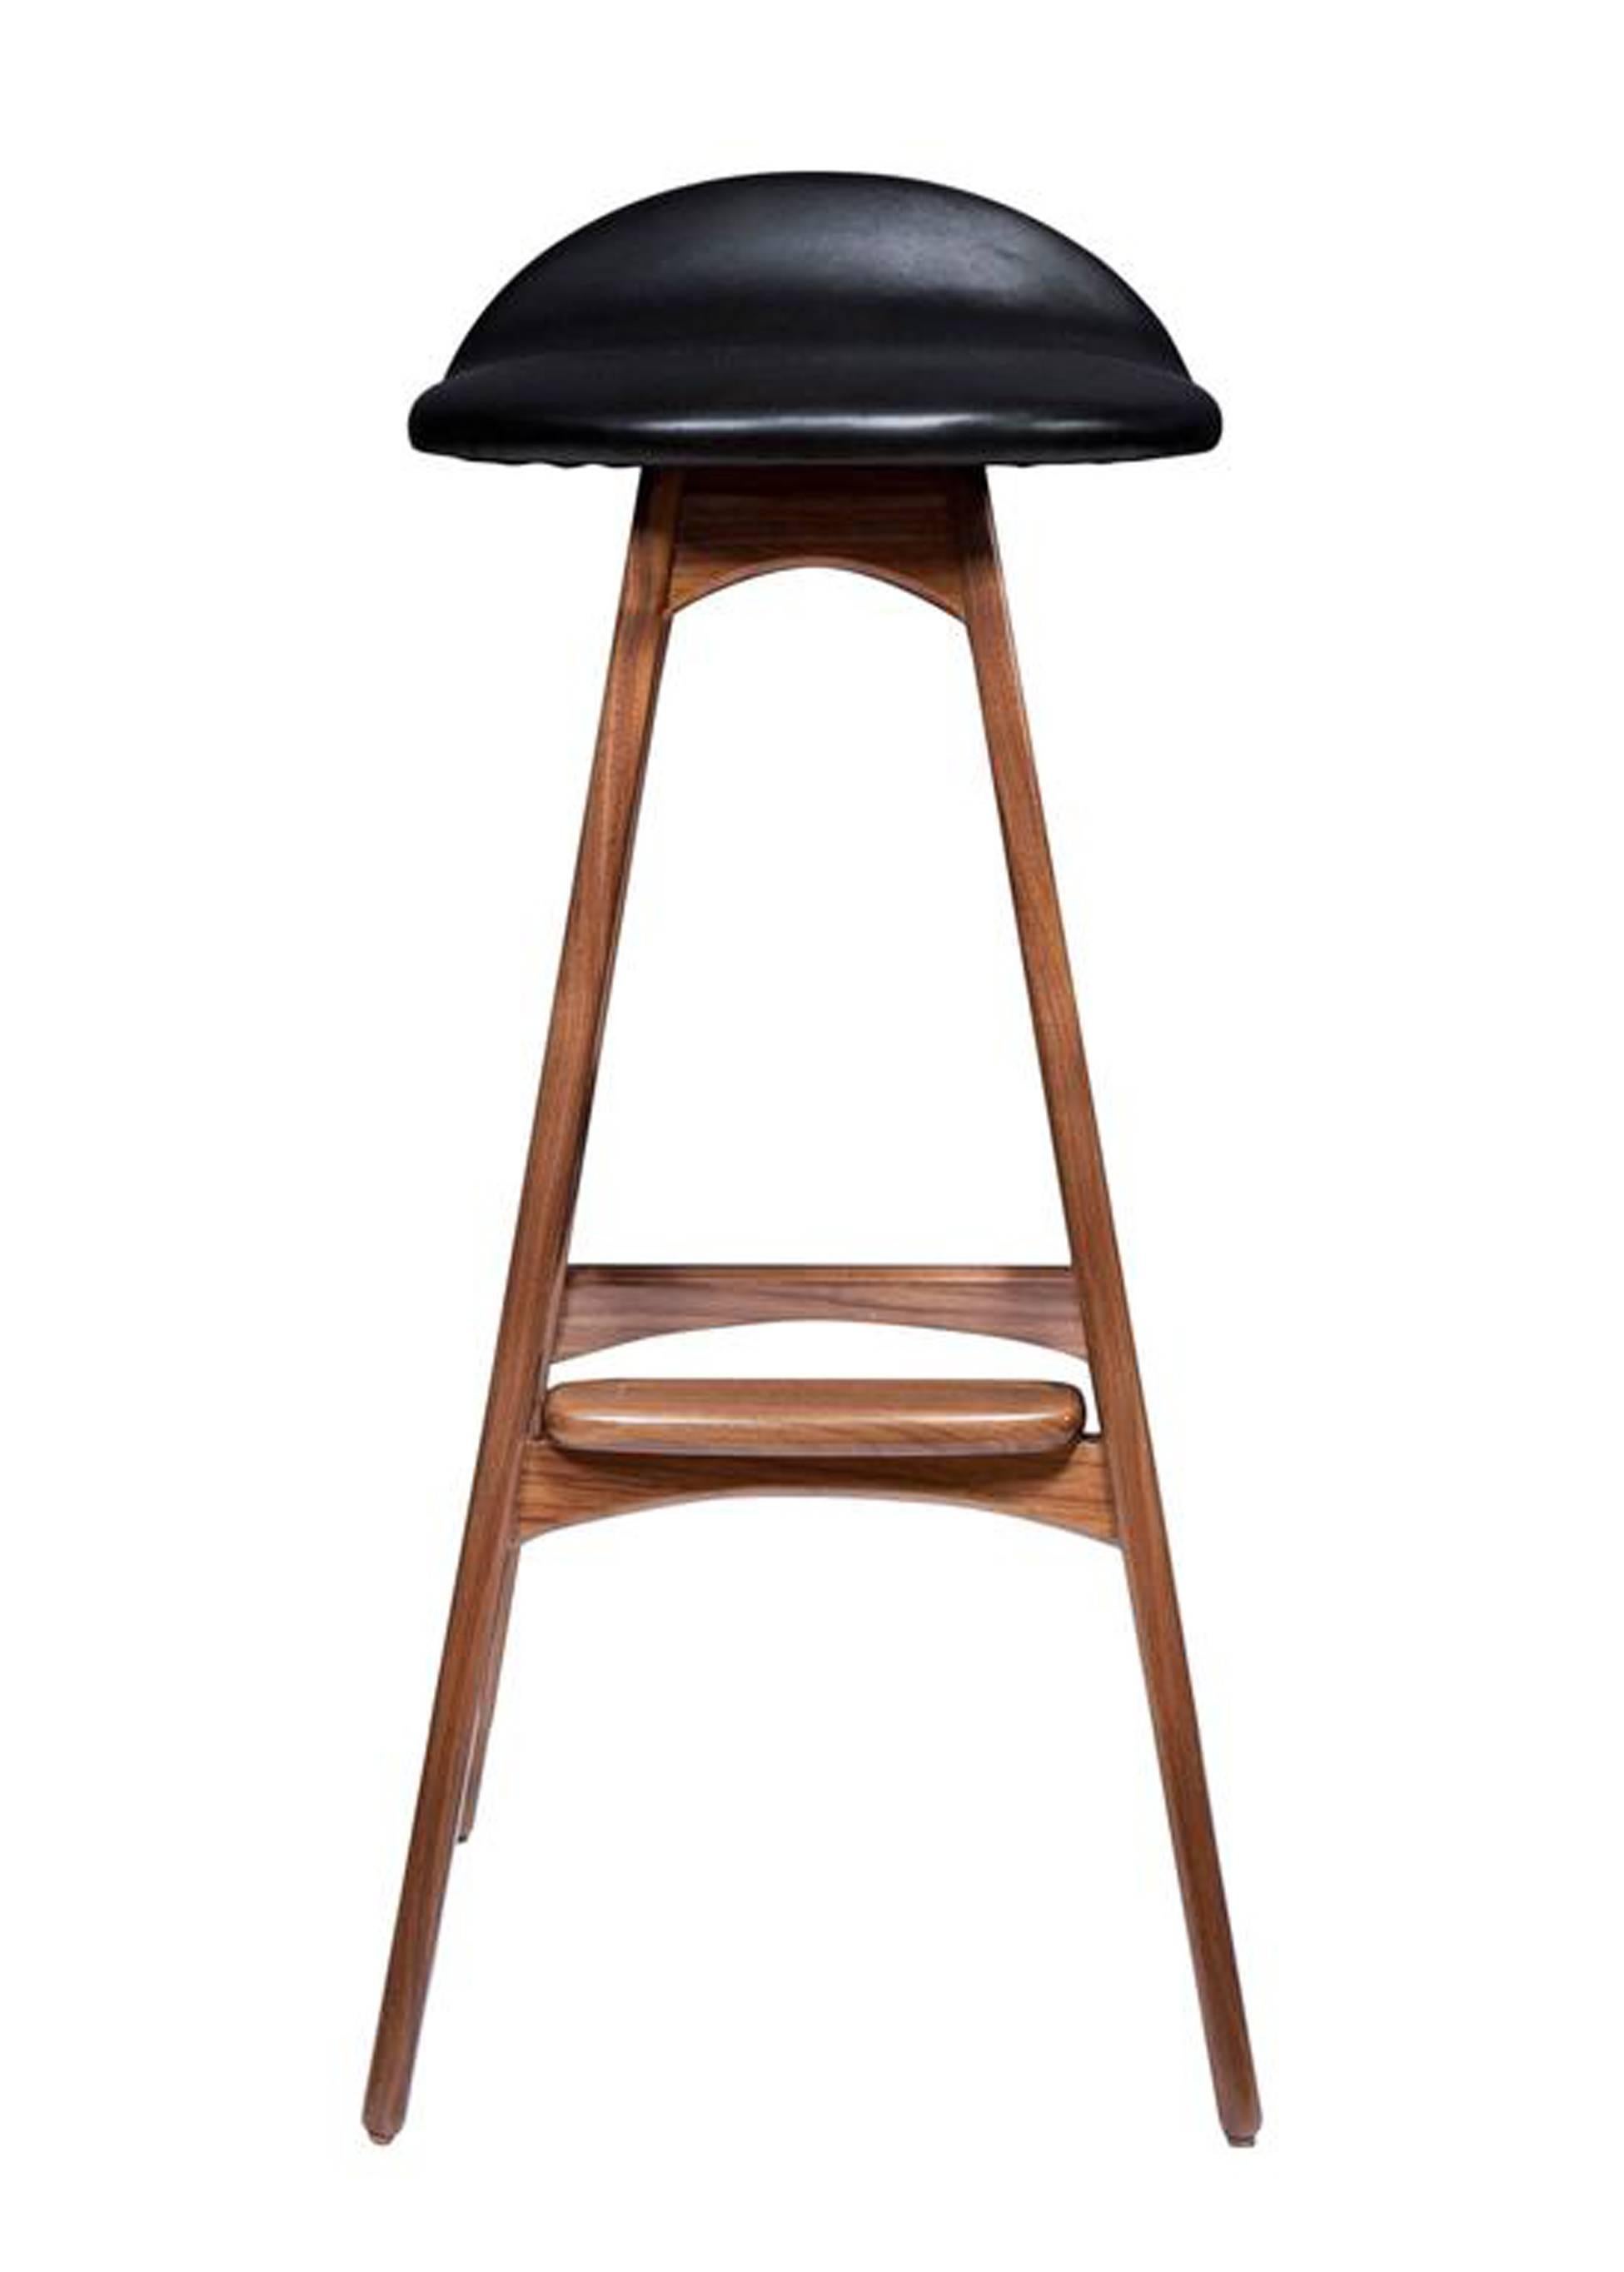 Boyd stool shown in solid walnut with black leather seat.
Measure: Seat height 29.75”
Custom orders have a lead time of 10-12 weeks FOB NYC. Lead time contingent upon selection of finishes, approval of shop drawings (if applicable), and receipt